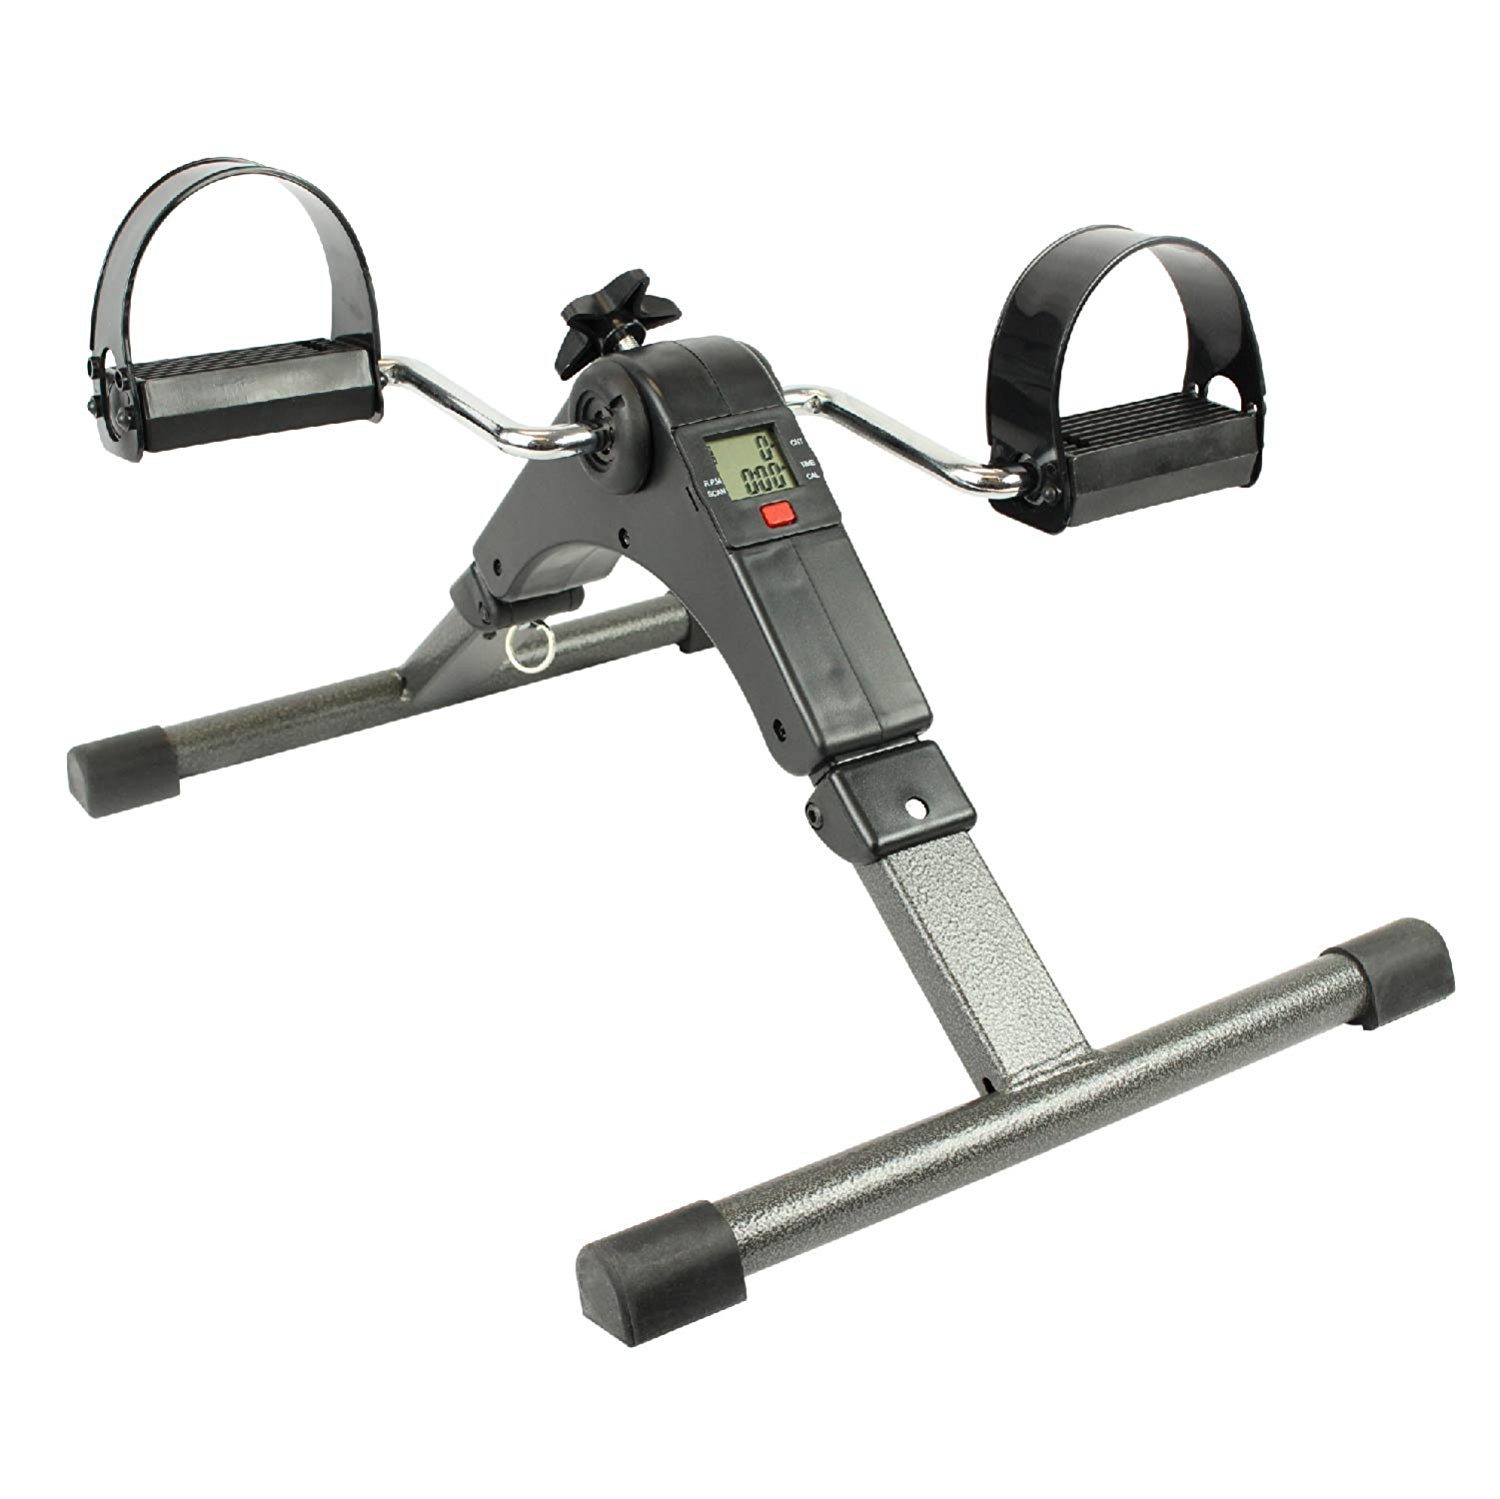 Small Space Home Fitness Equipment For Your Apartment | Low-Impact Portable Peddle Exerciser